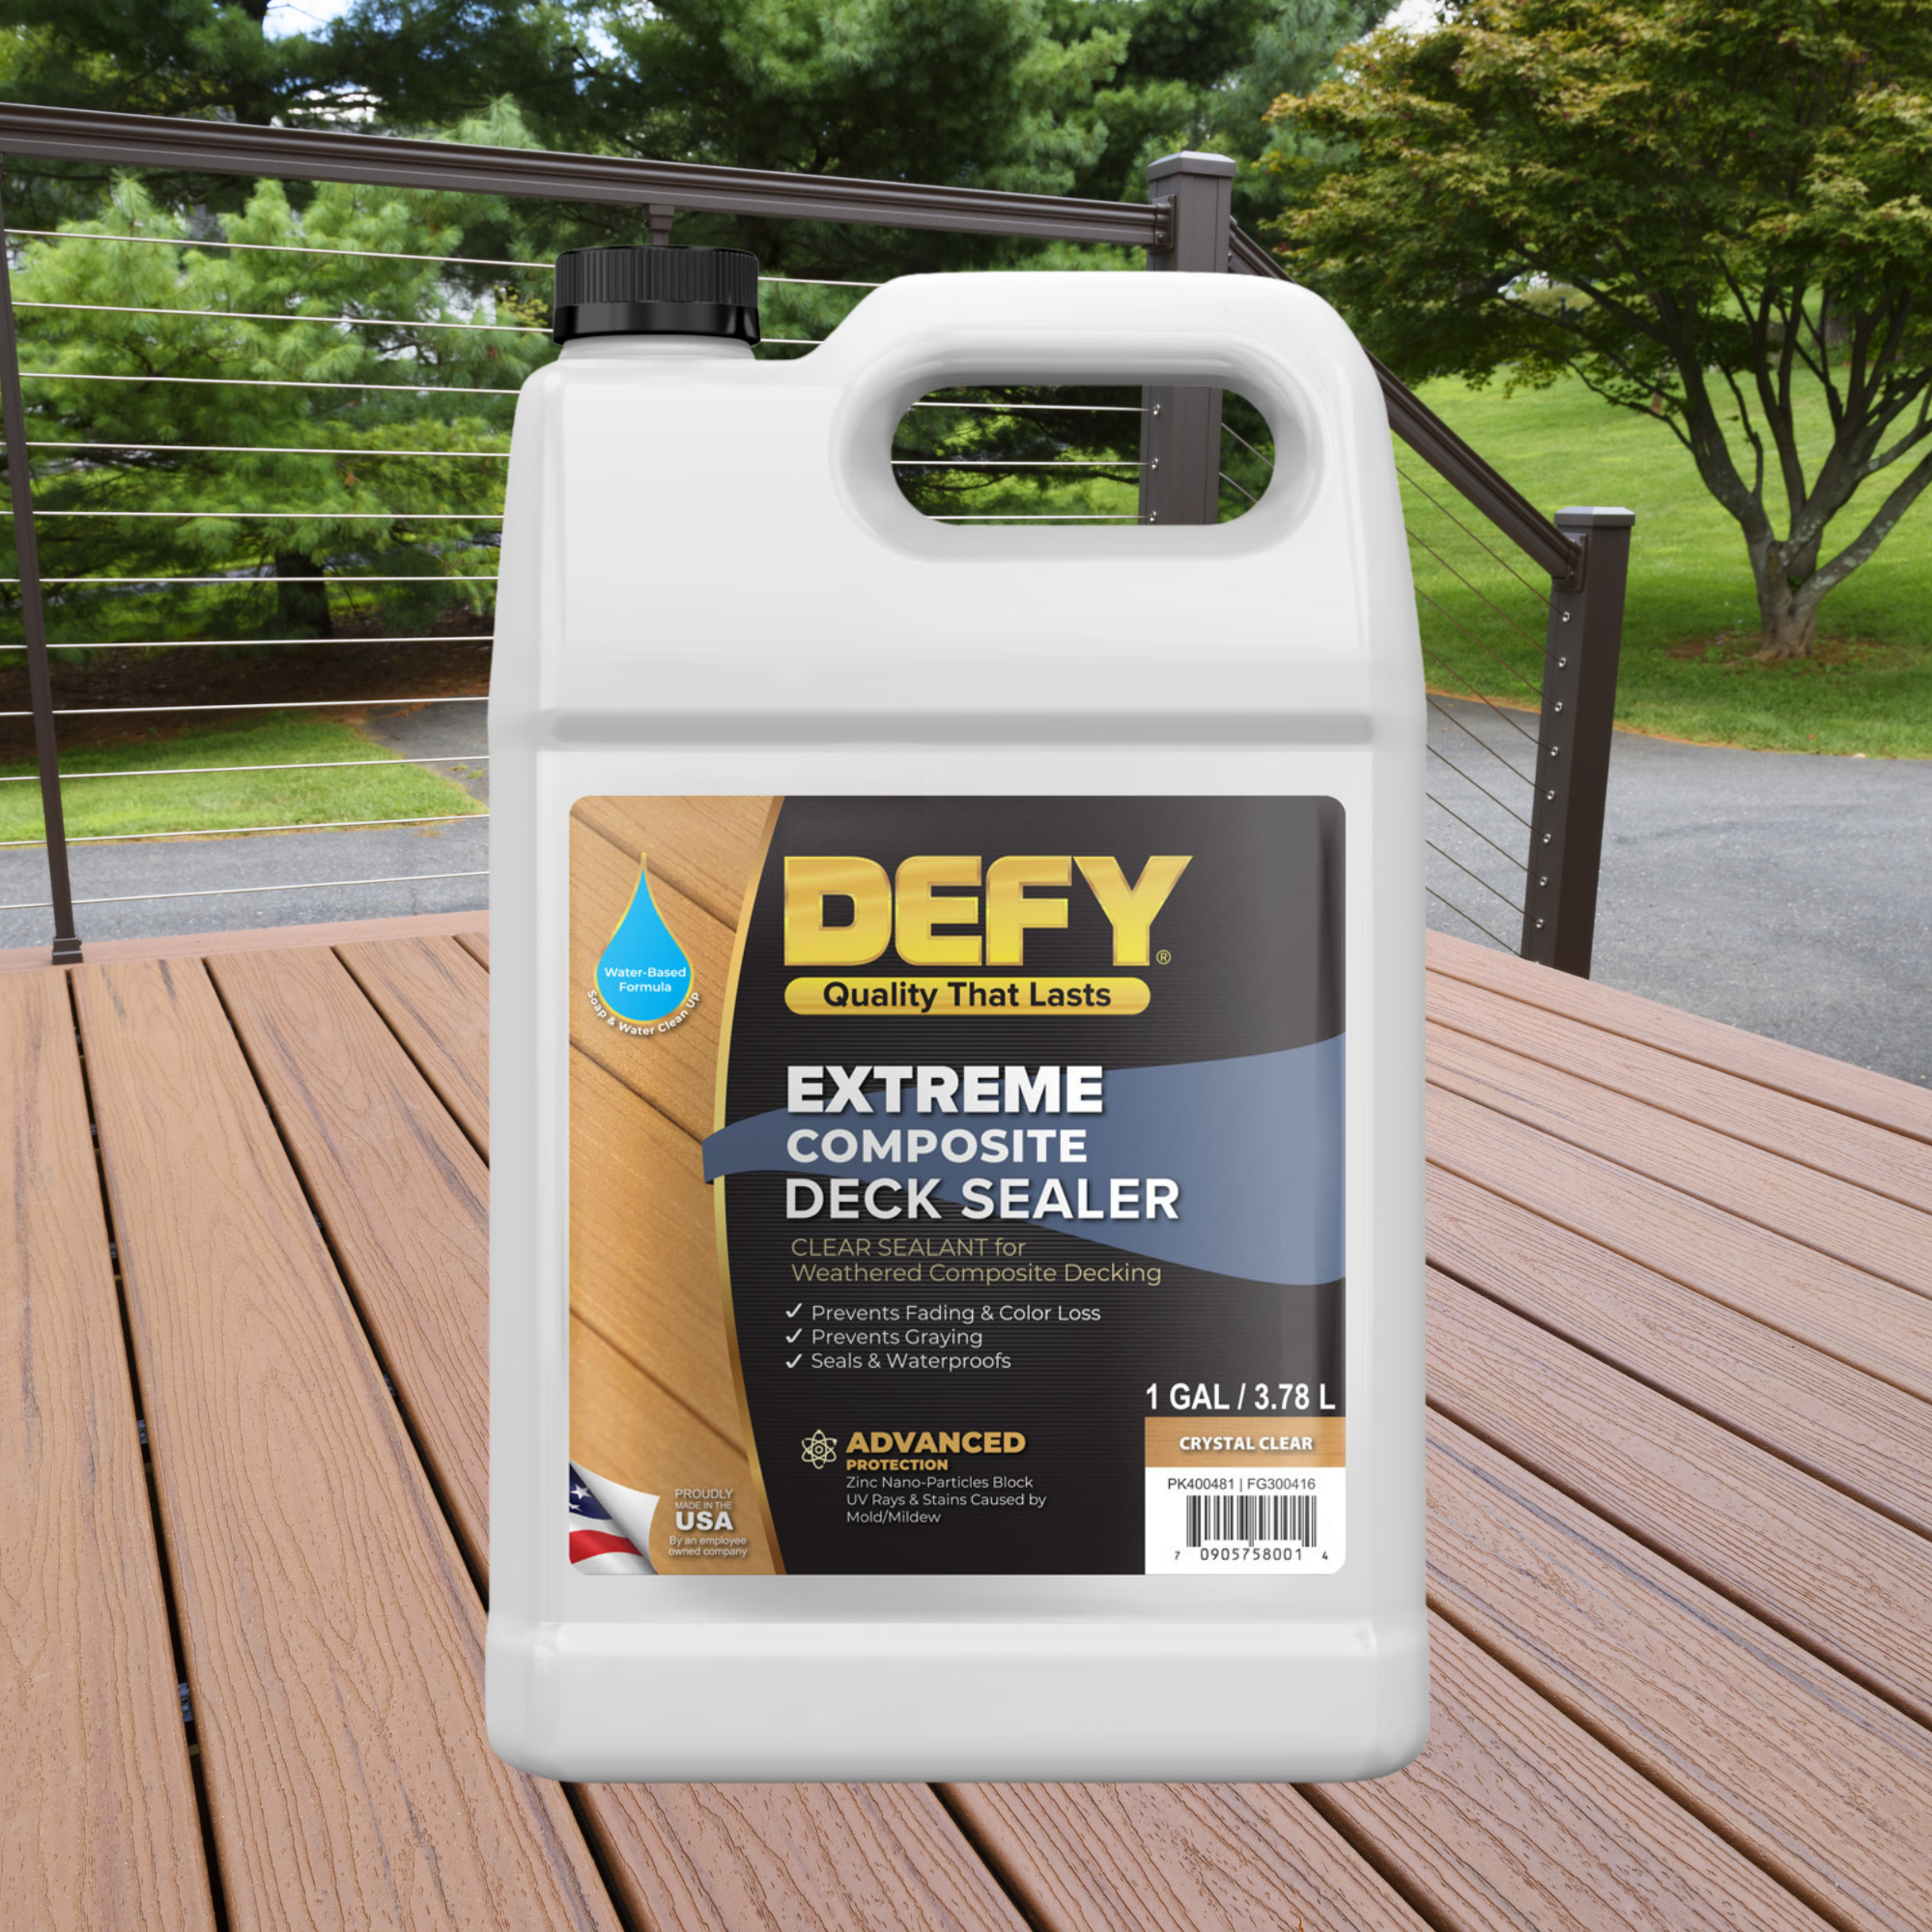 End Sealer For Green Logs and Lumber - Water Based - Gallon